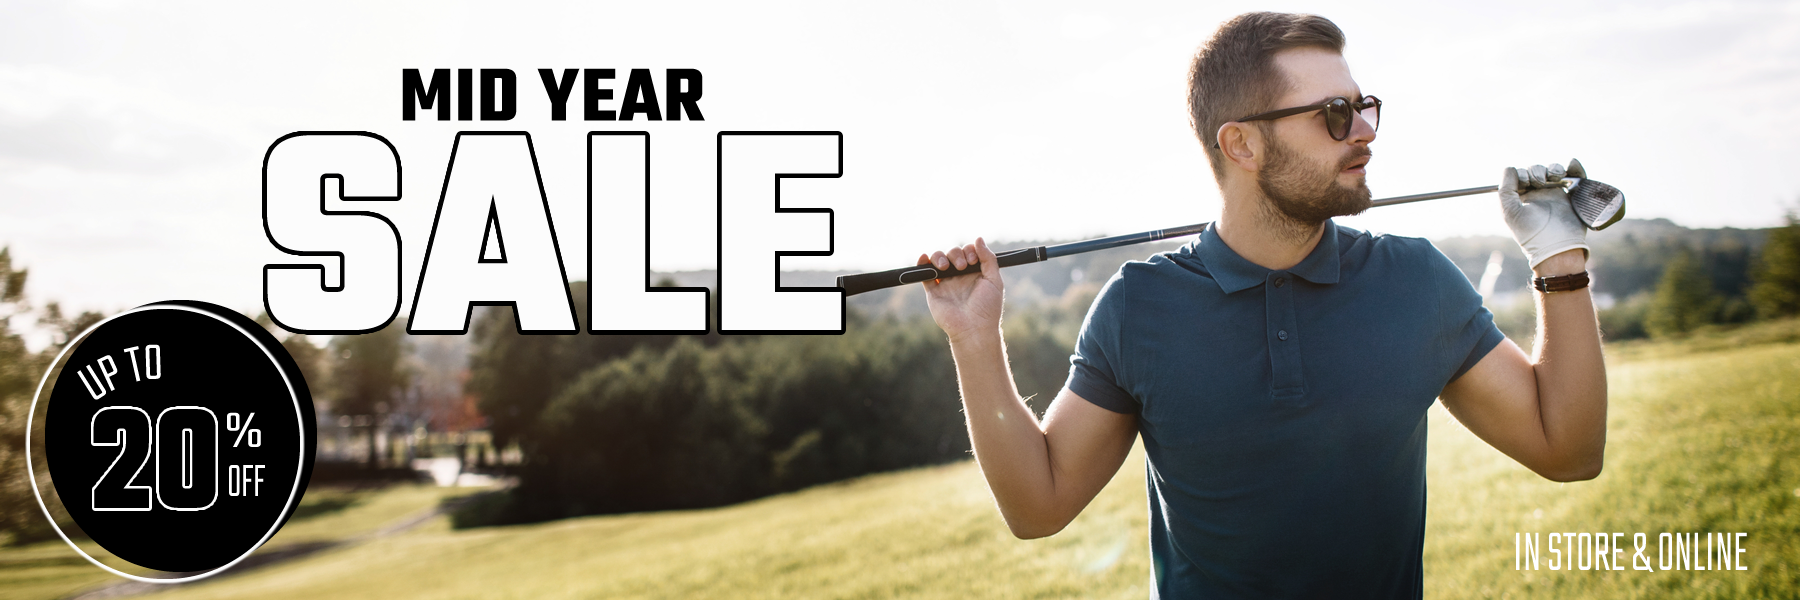 The House of Golf Mid Year sale up to 20% OFF on apparel, bags, accessories and more